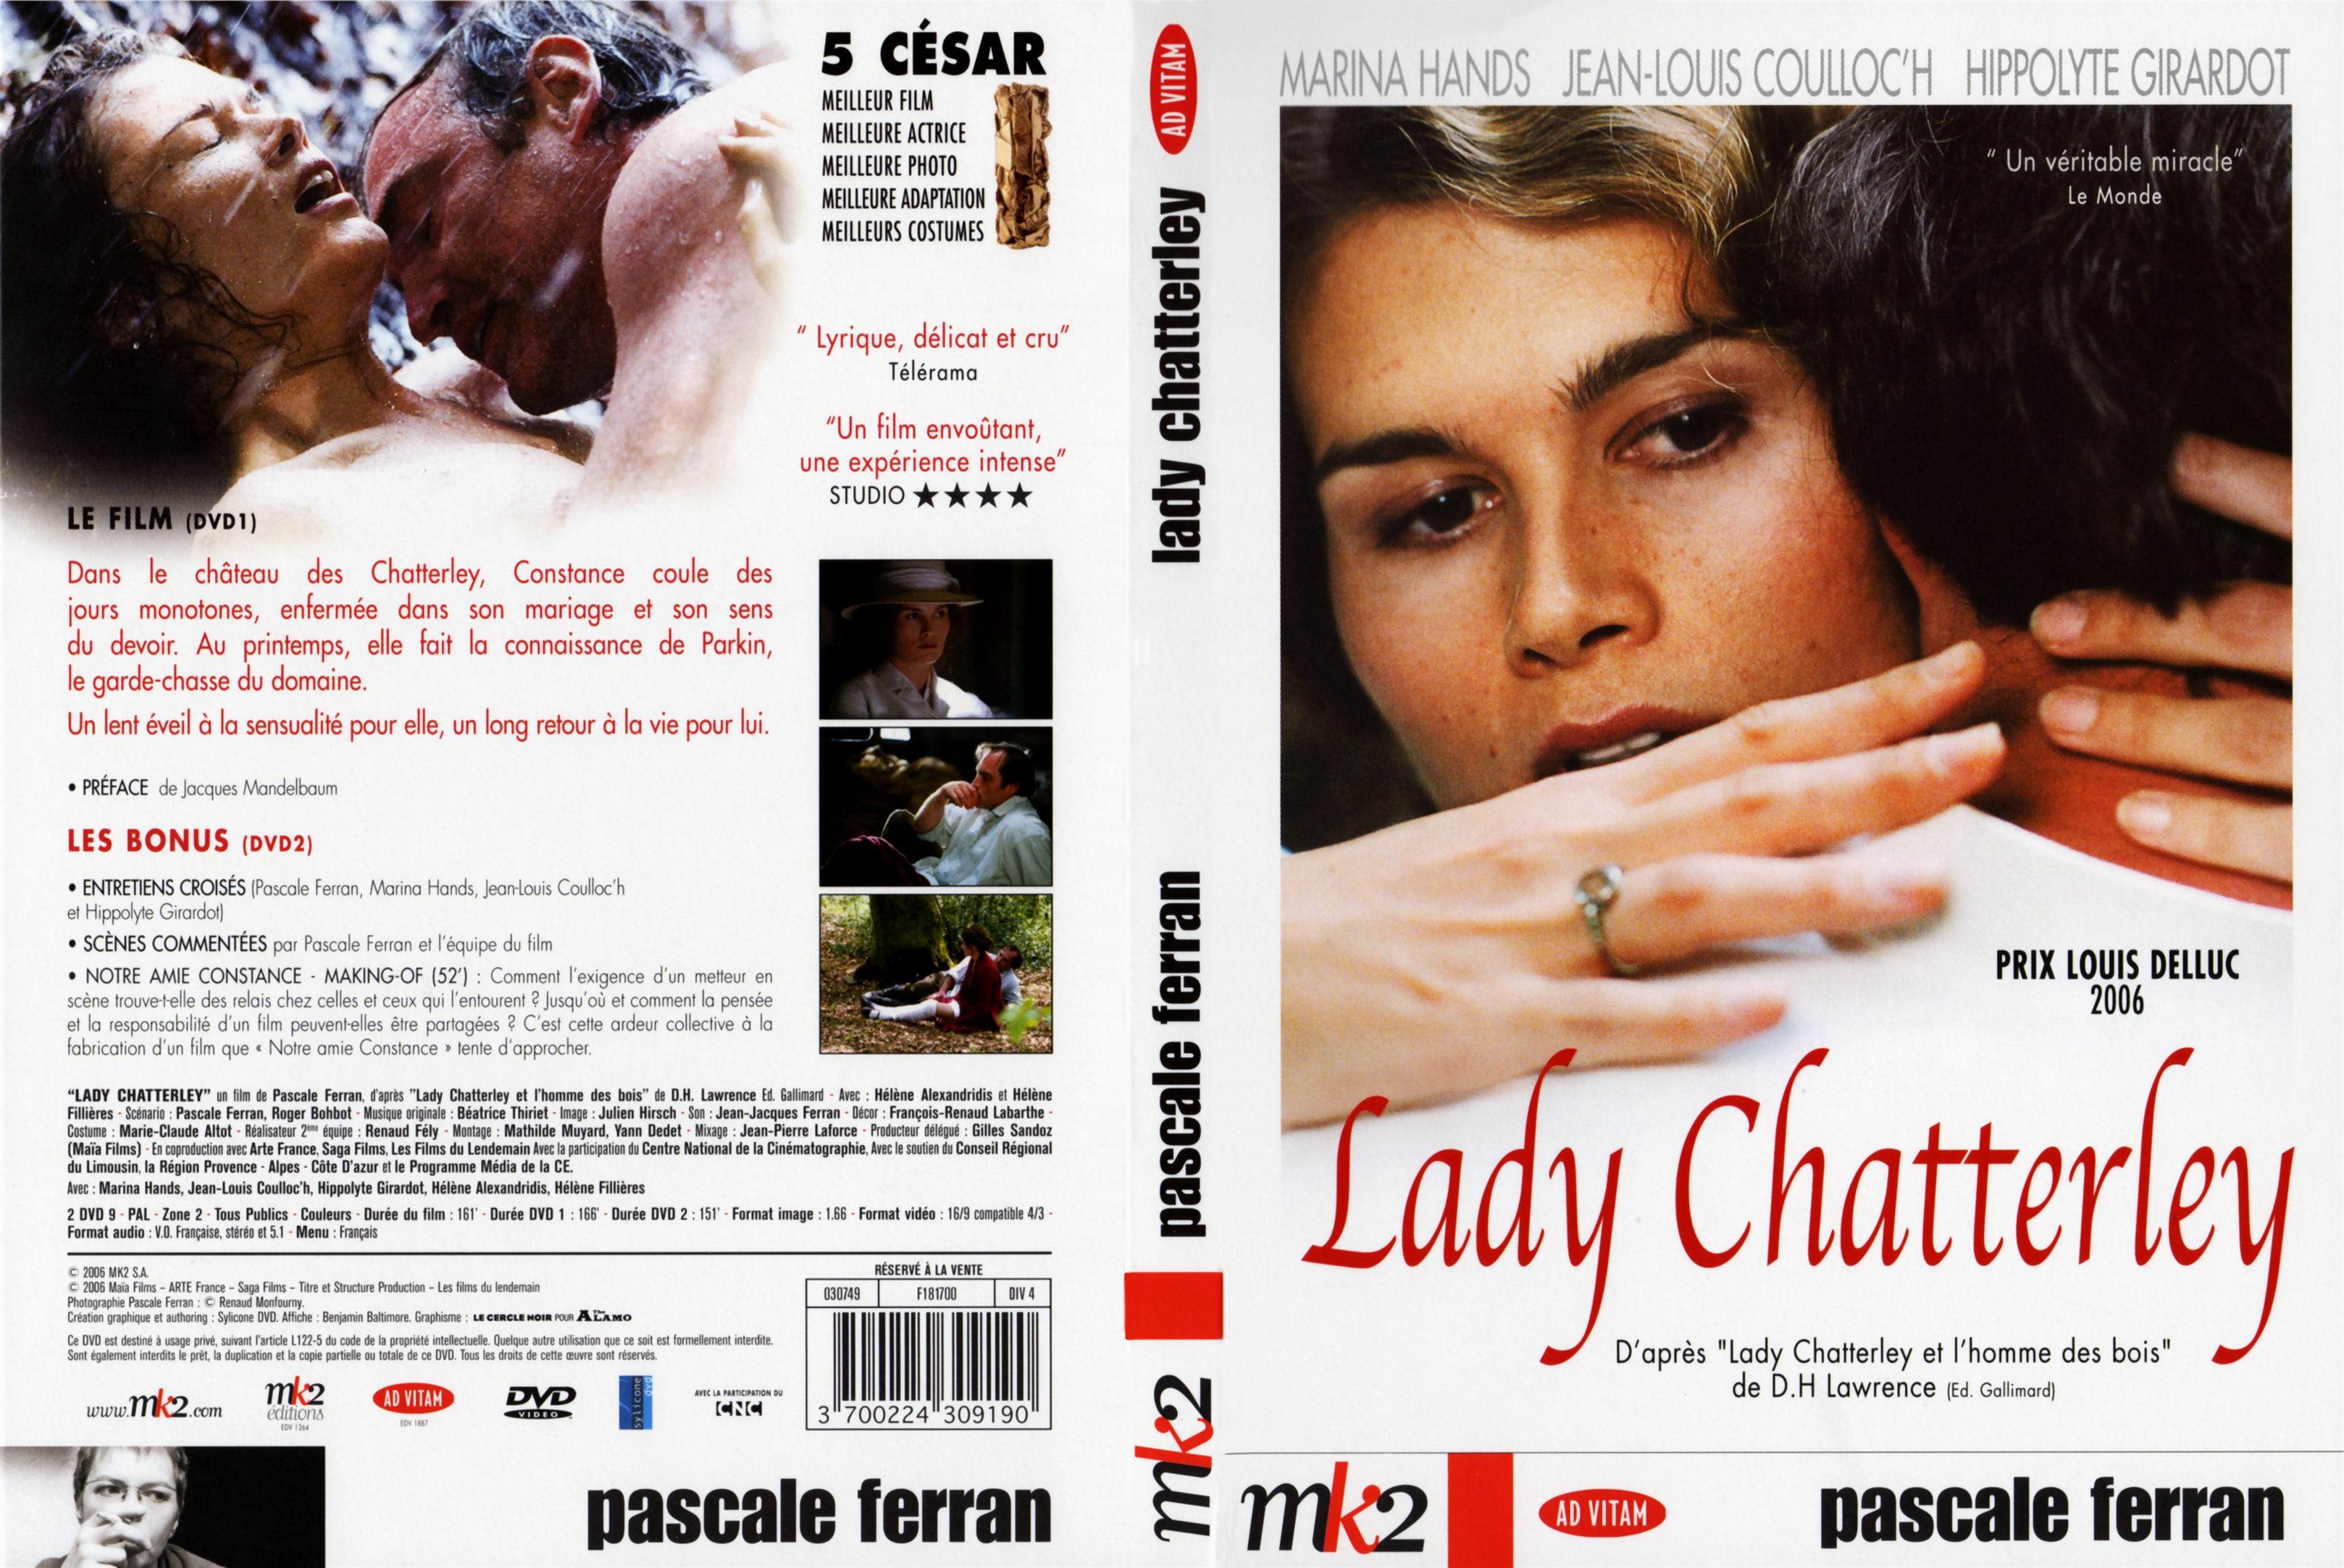 Jaquette DVD Lady Chatterley v2